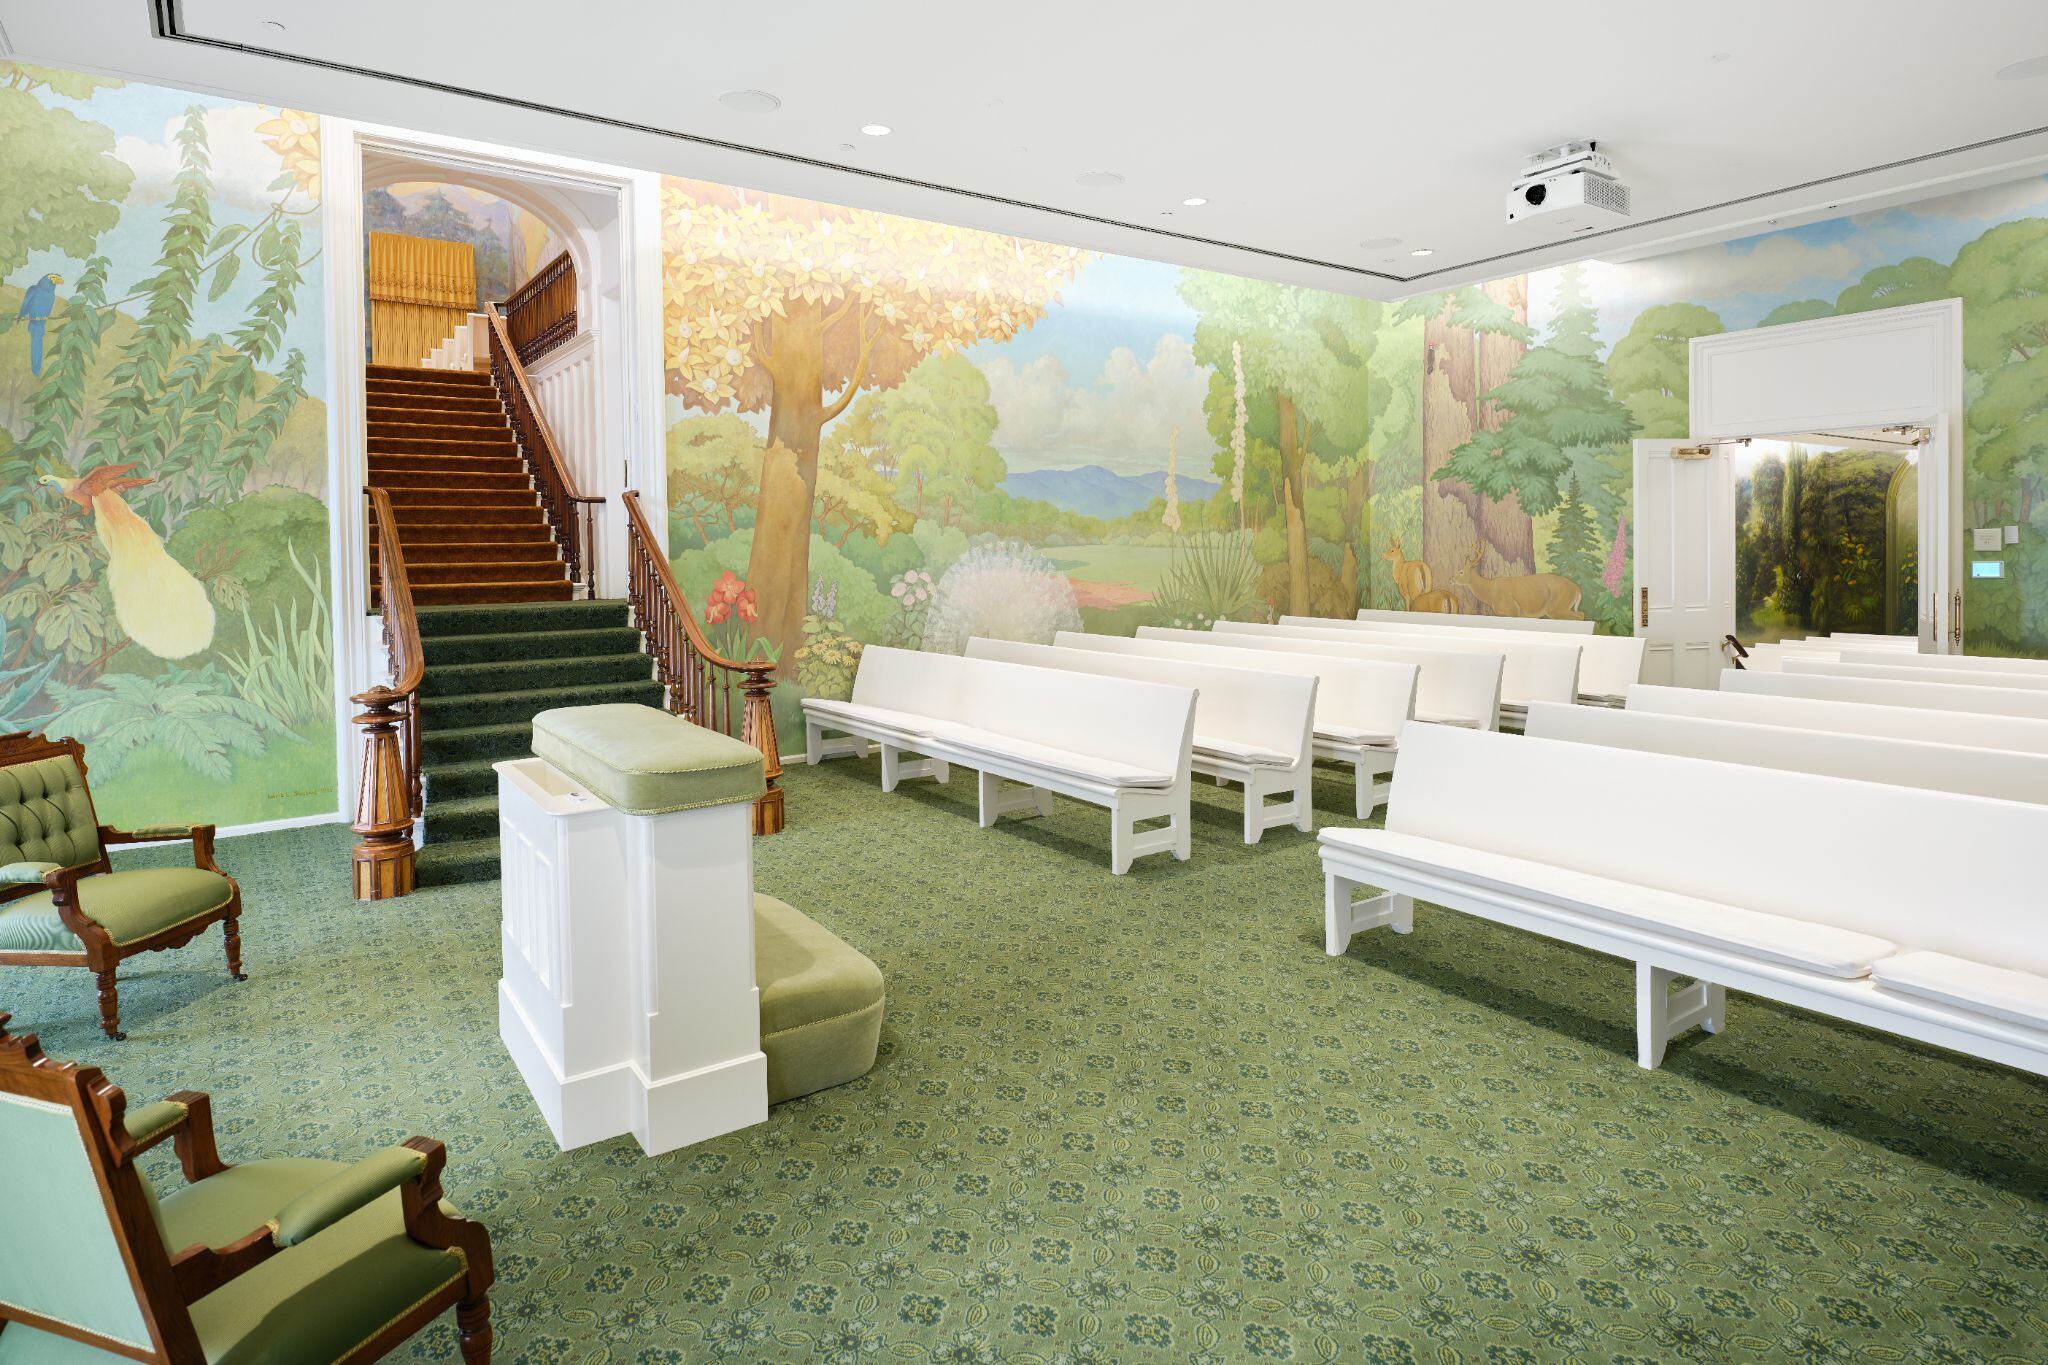 (The Church of Jesus Christ of Latter-day Saints) An ordinance room in the Manti Temple.